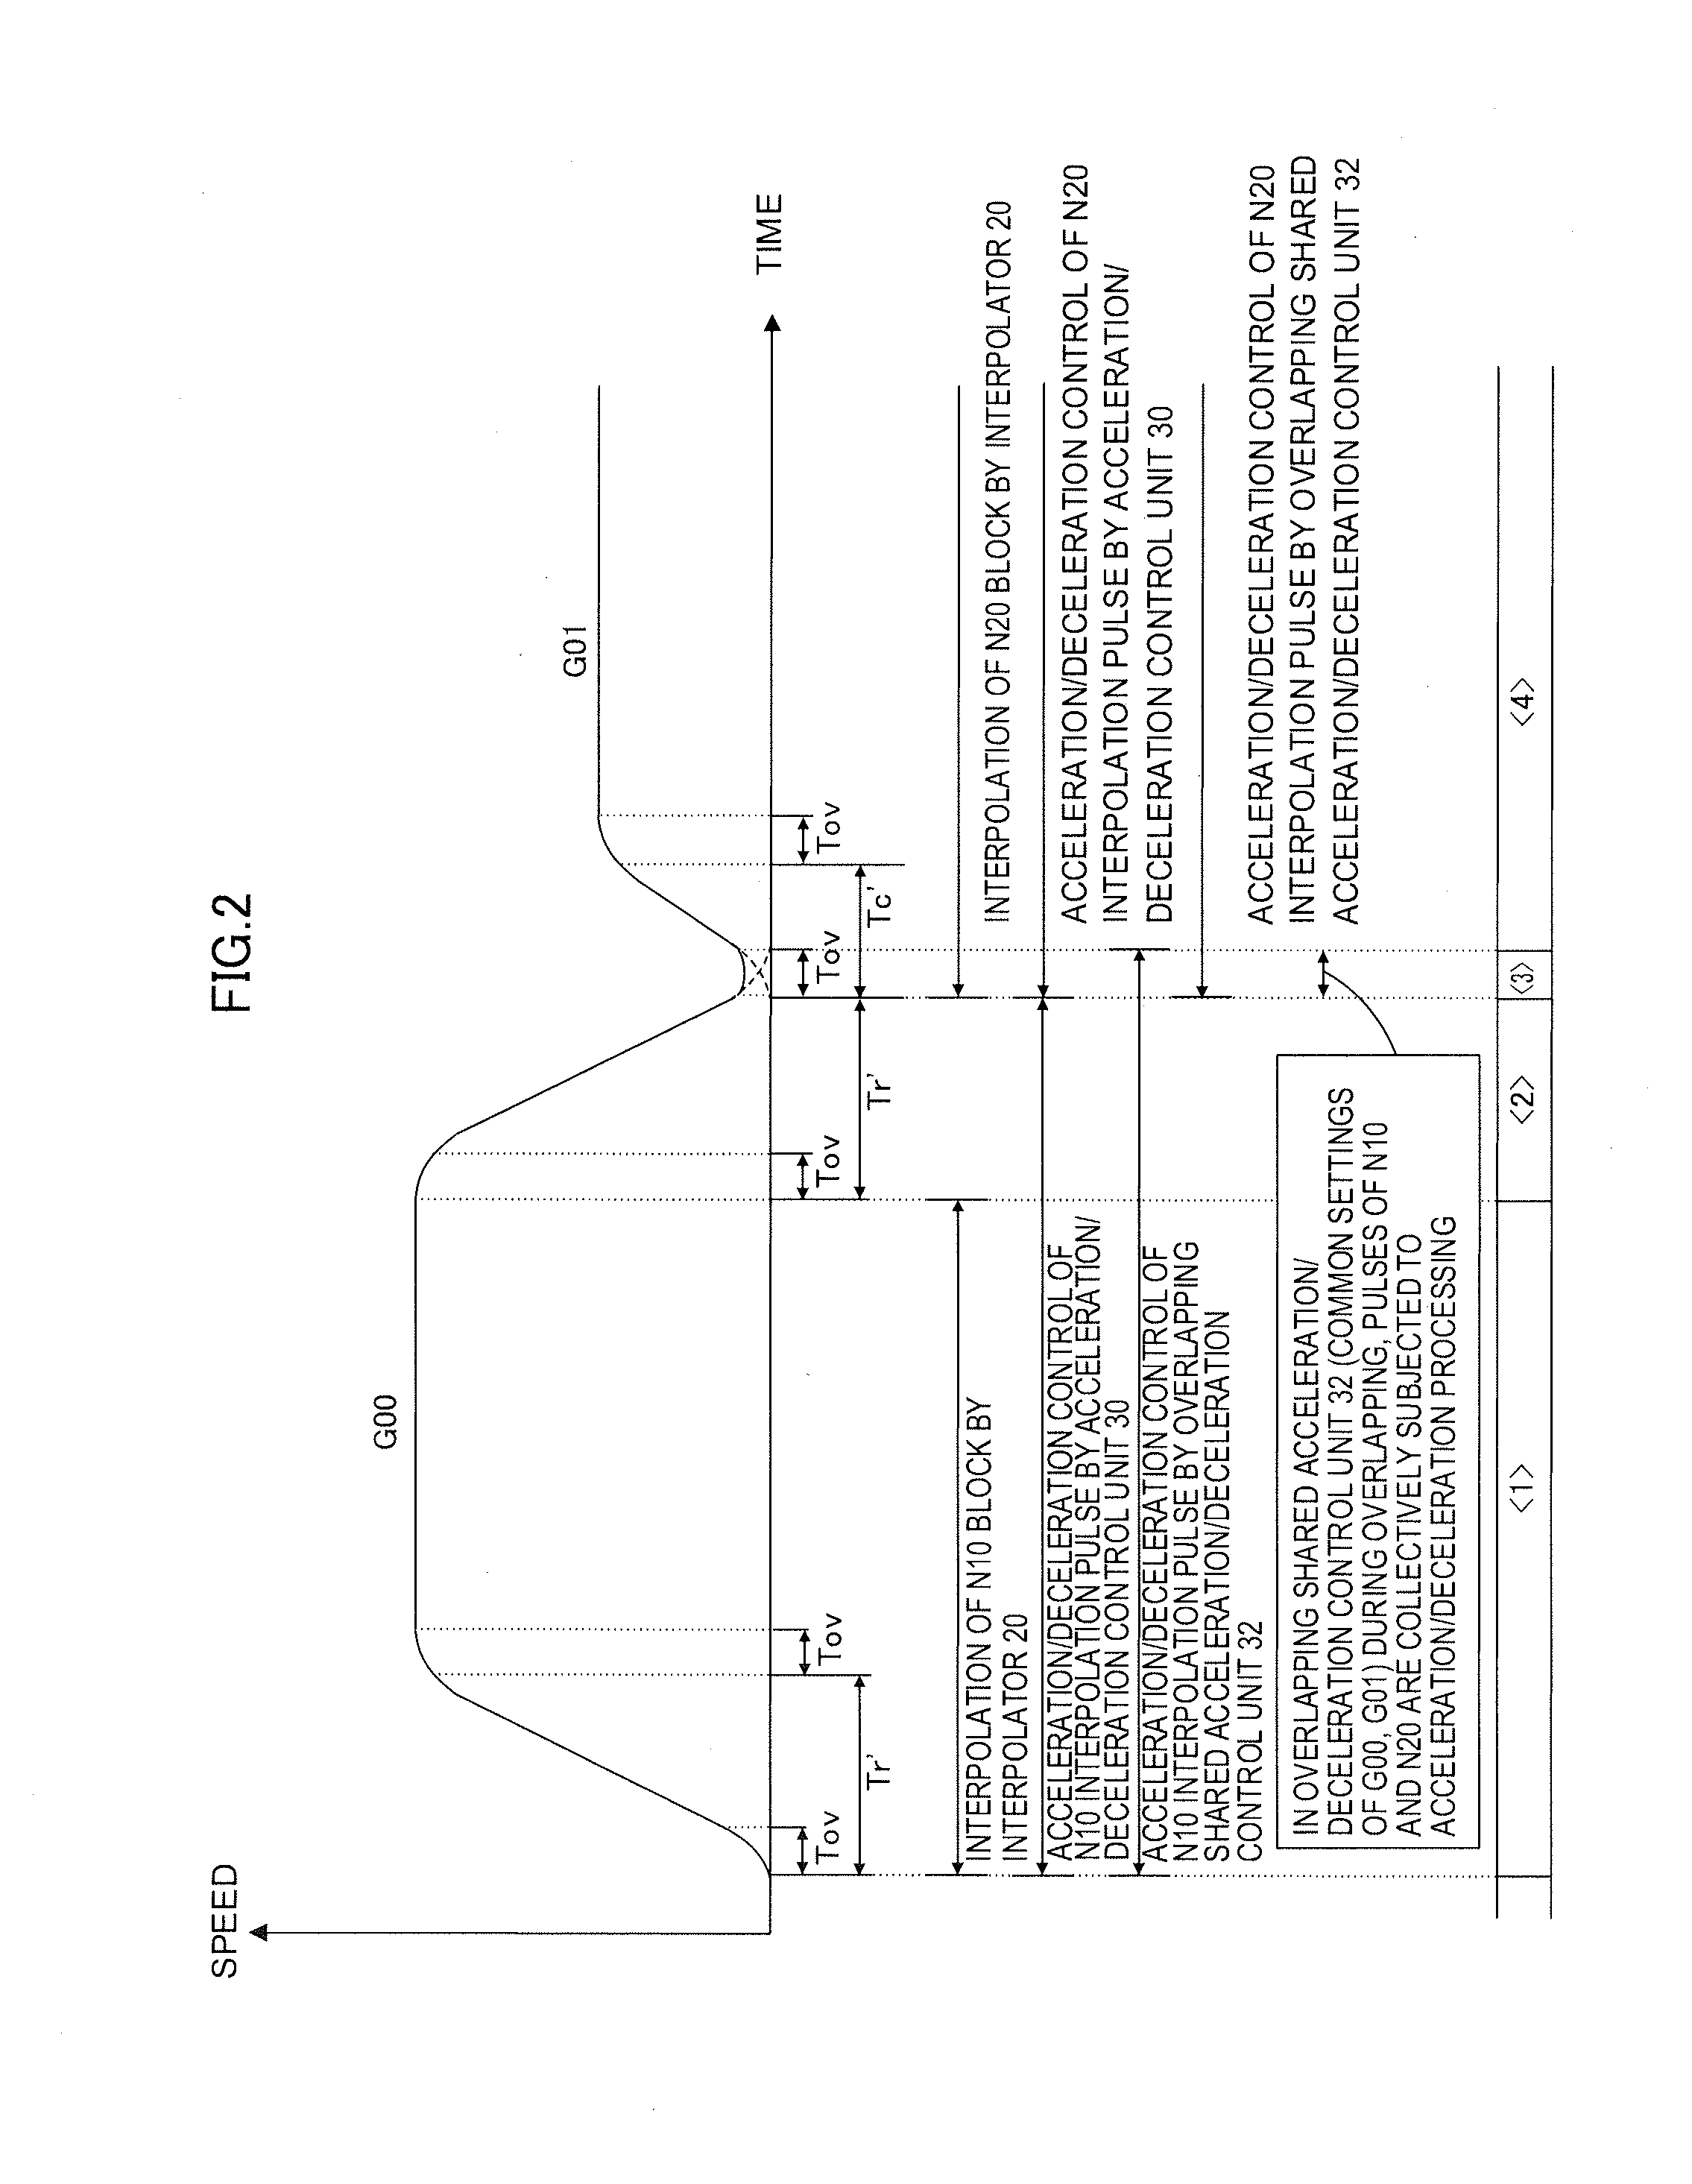 Numerical controller including overlap function between arbitrary blocks by common acceleration/deceleration control unit